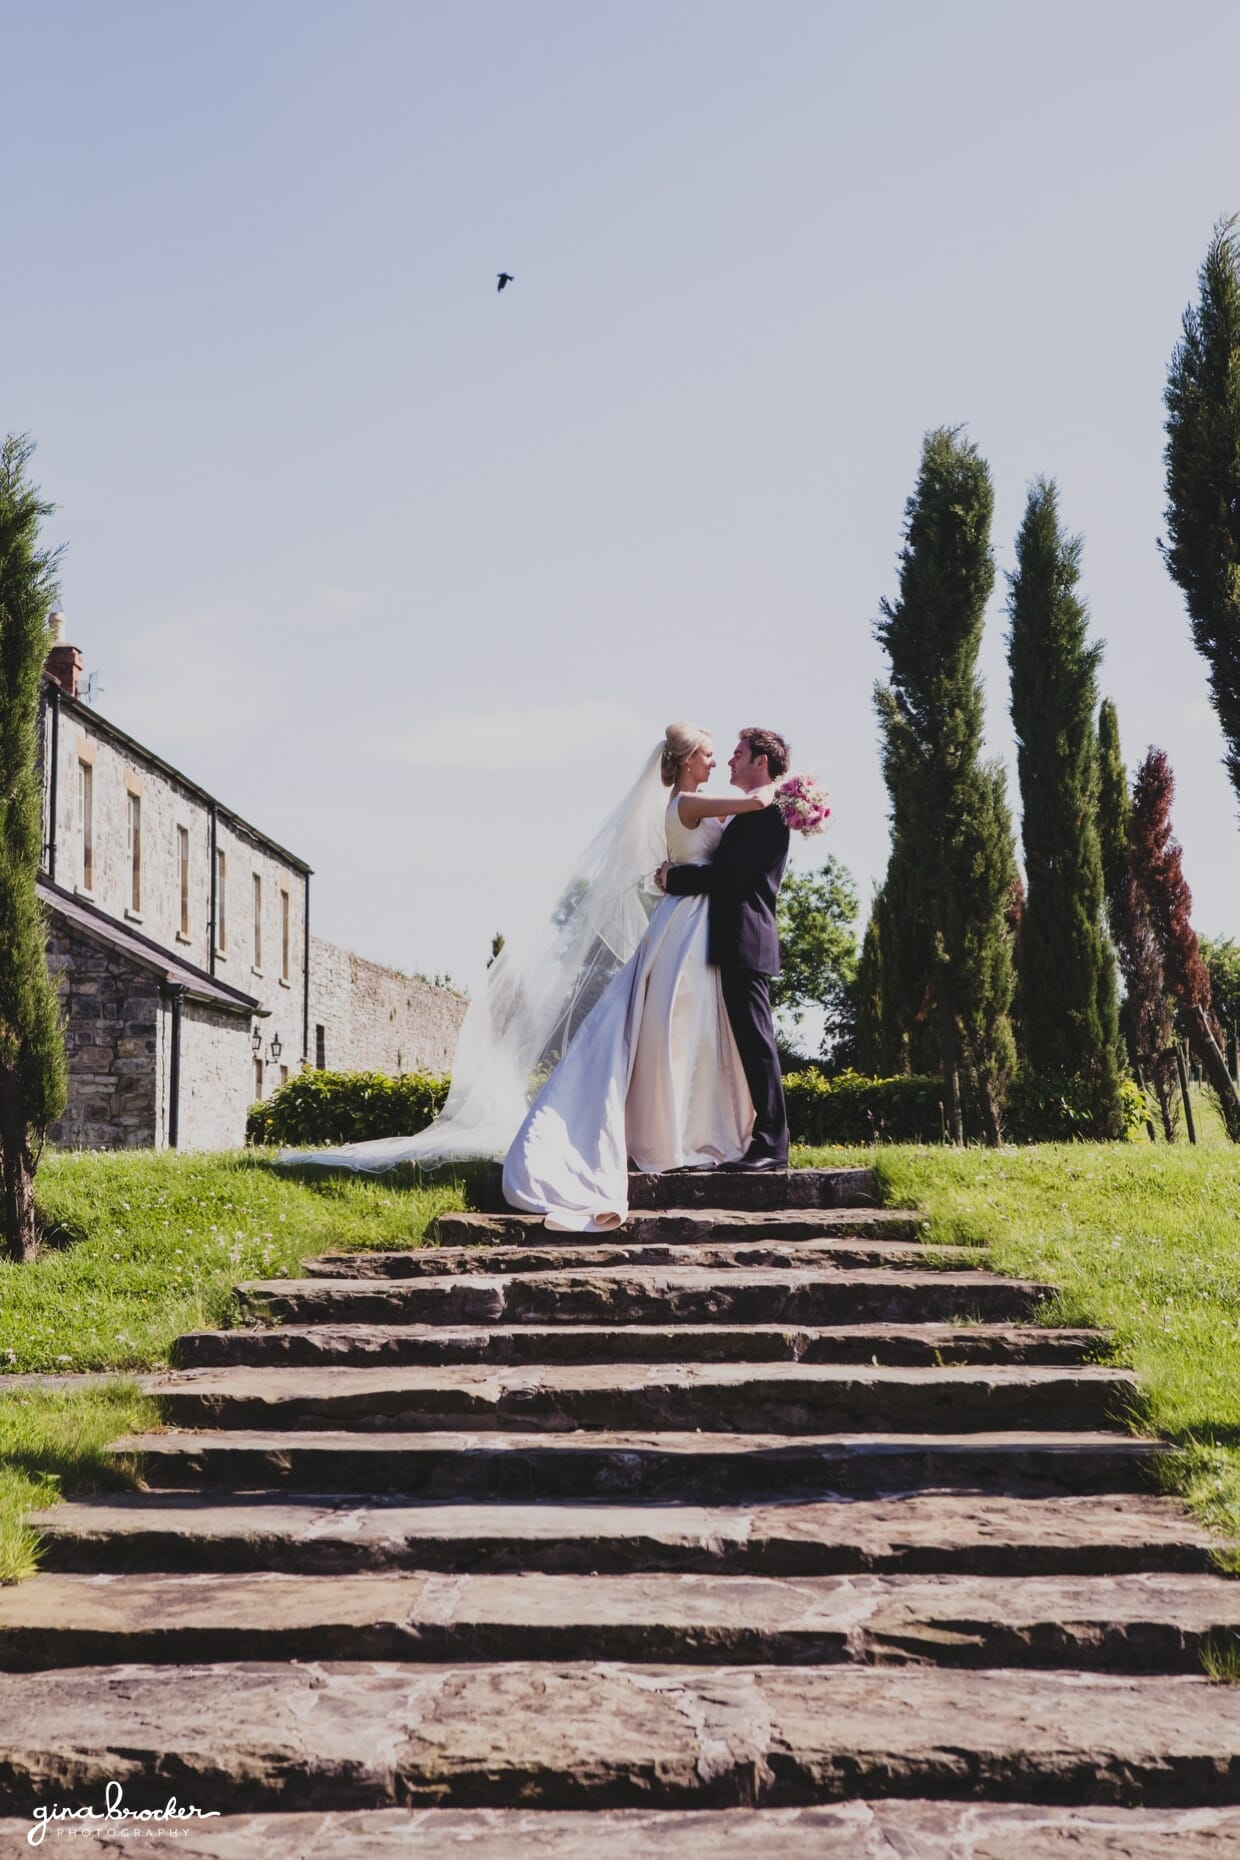 A sweet and natural portrait of a bride and groom at the top of the steps during a classic garden wedding